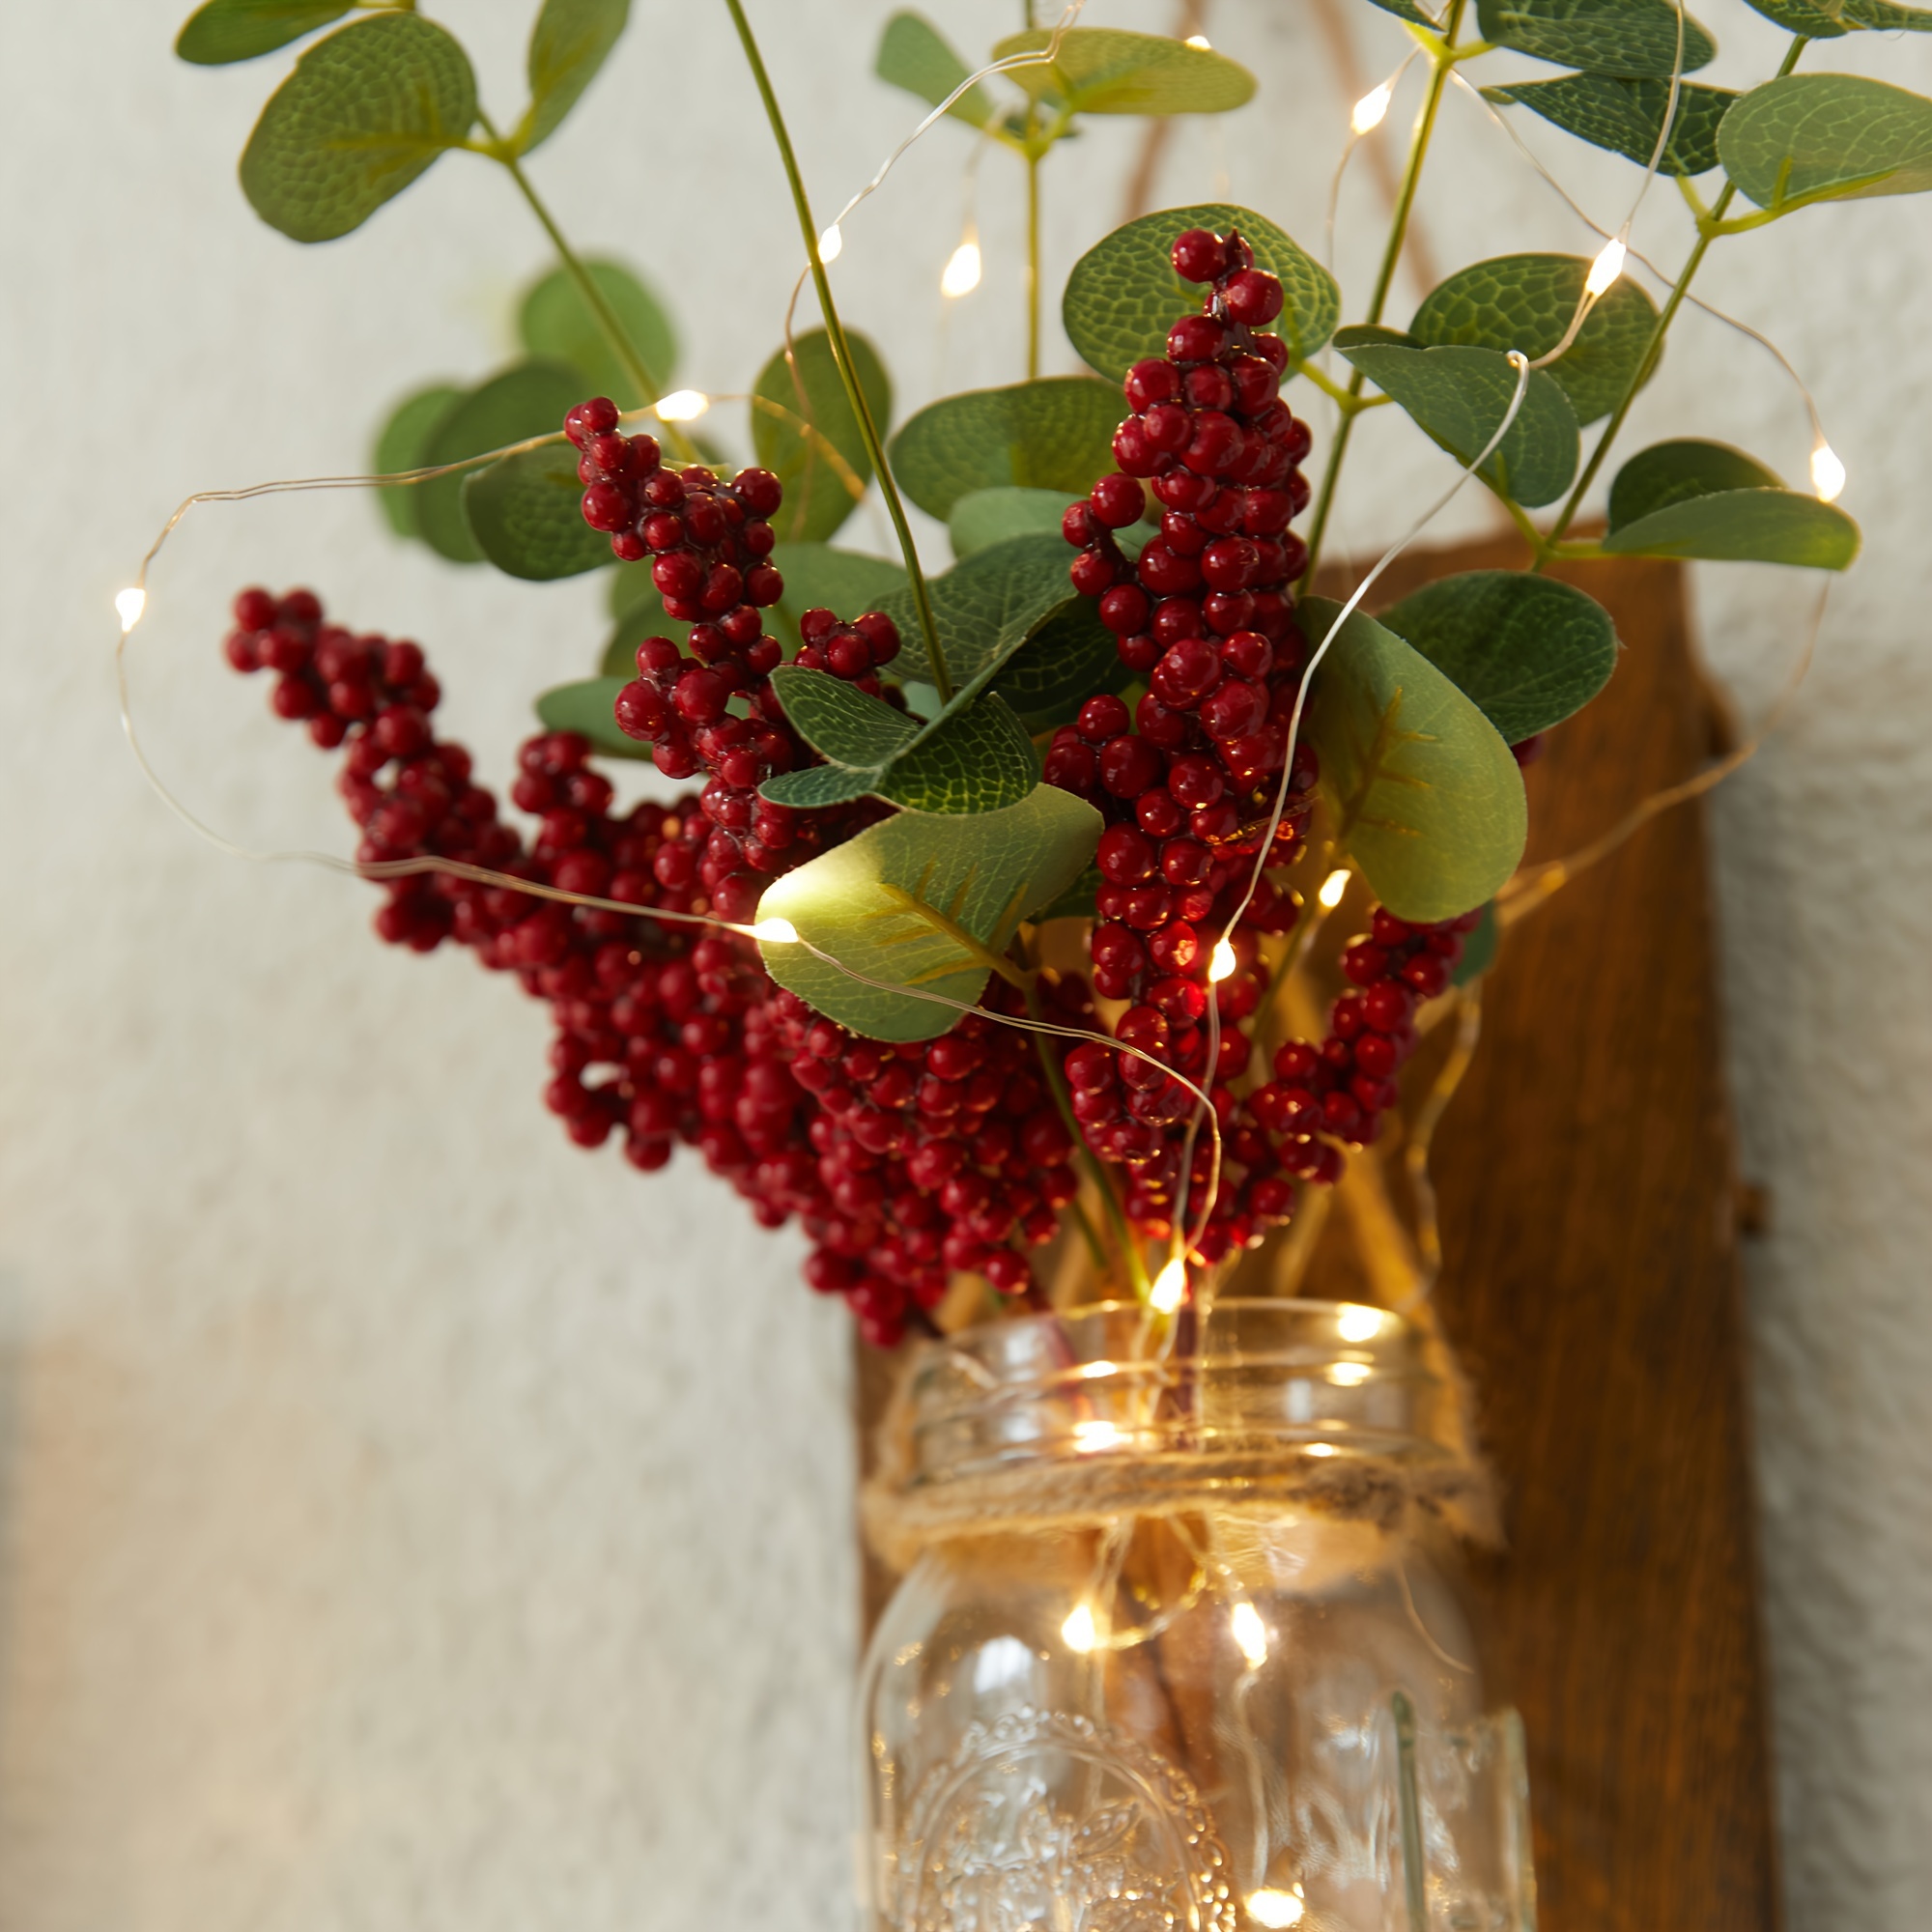 YHDSN Artificial Eucalyptus Stems with Red Berries - 13.78 Faux